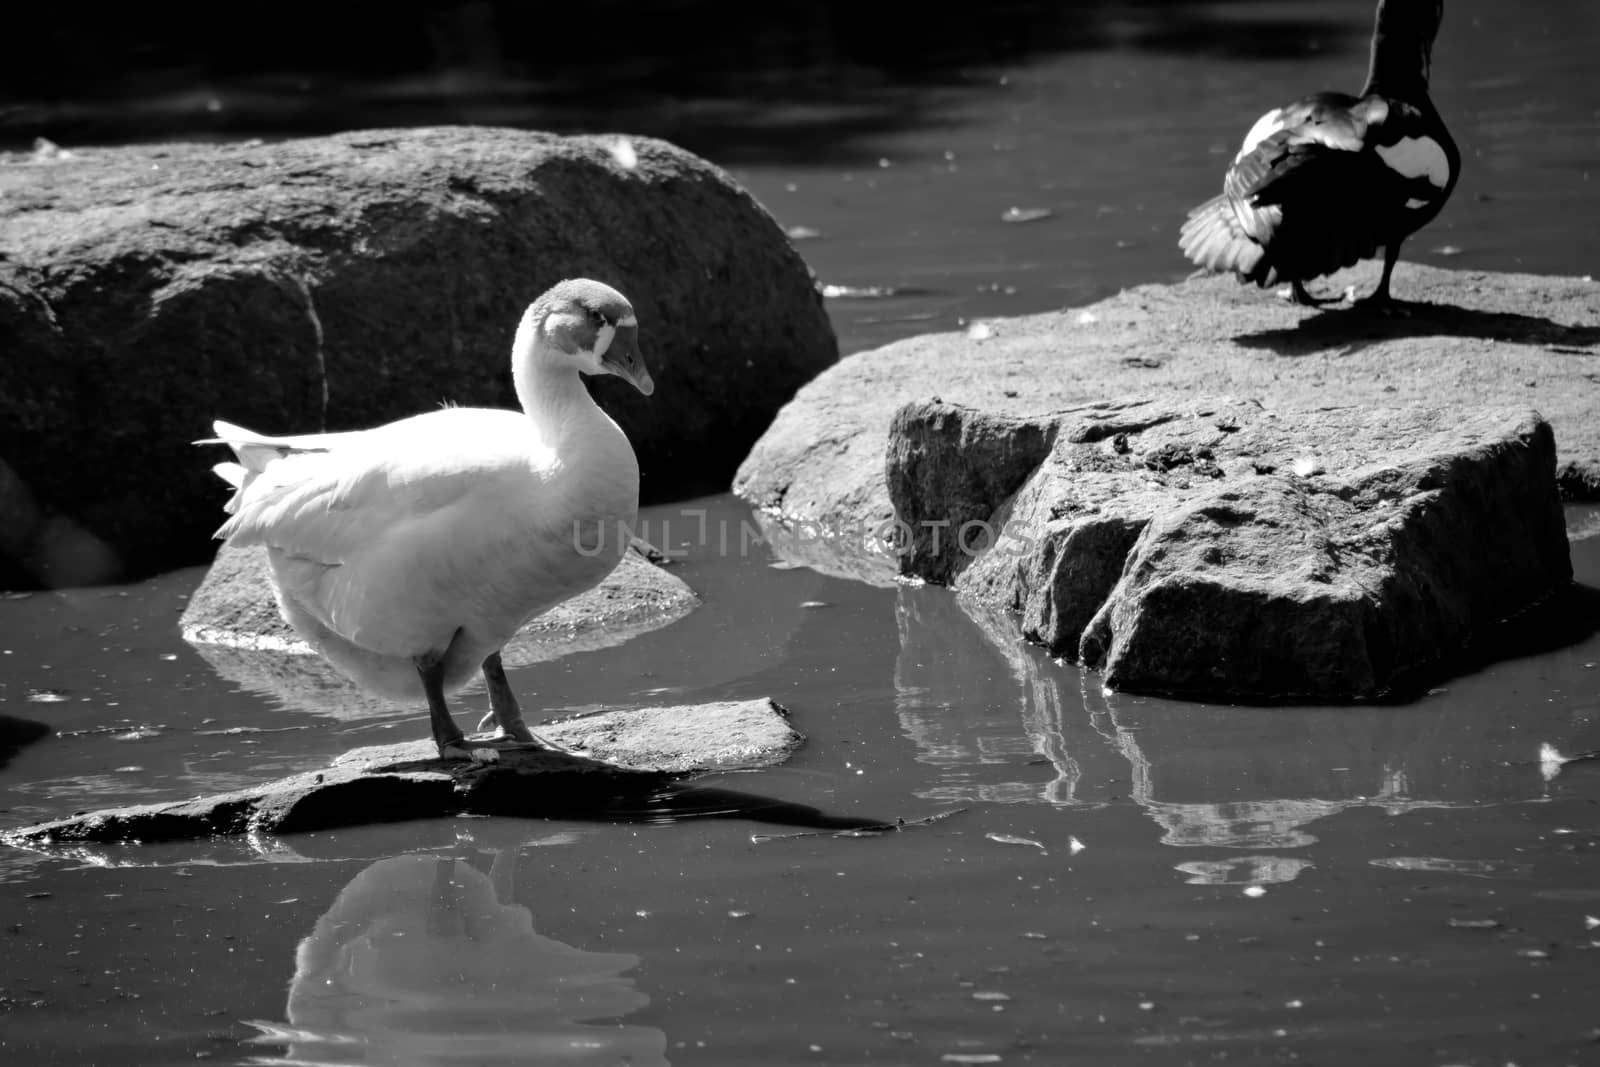 White goose on rock by water in black and white